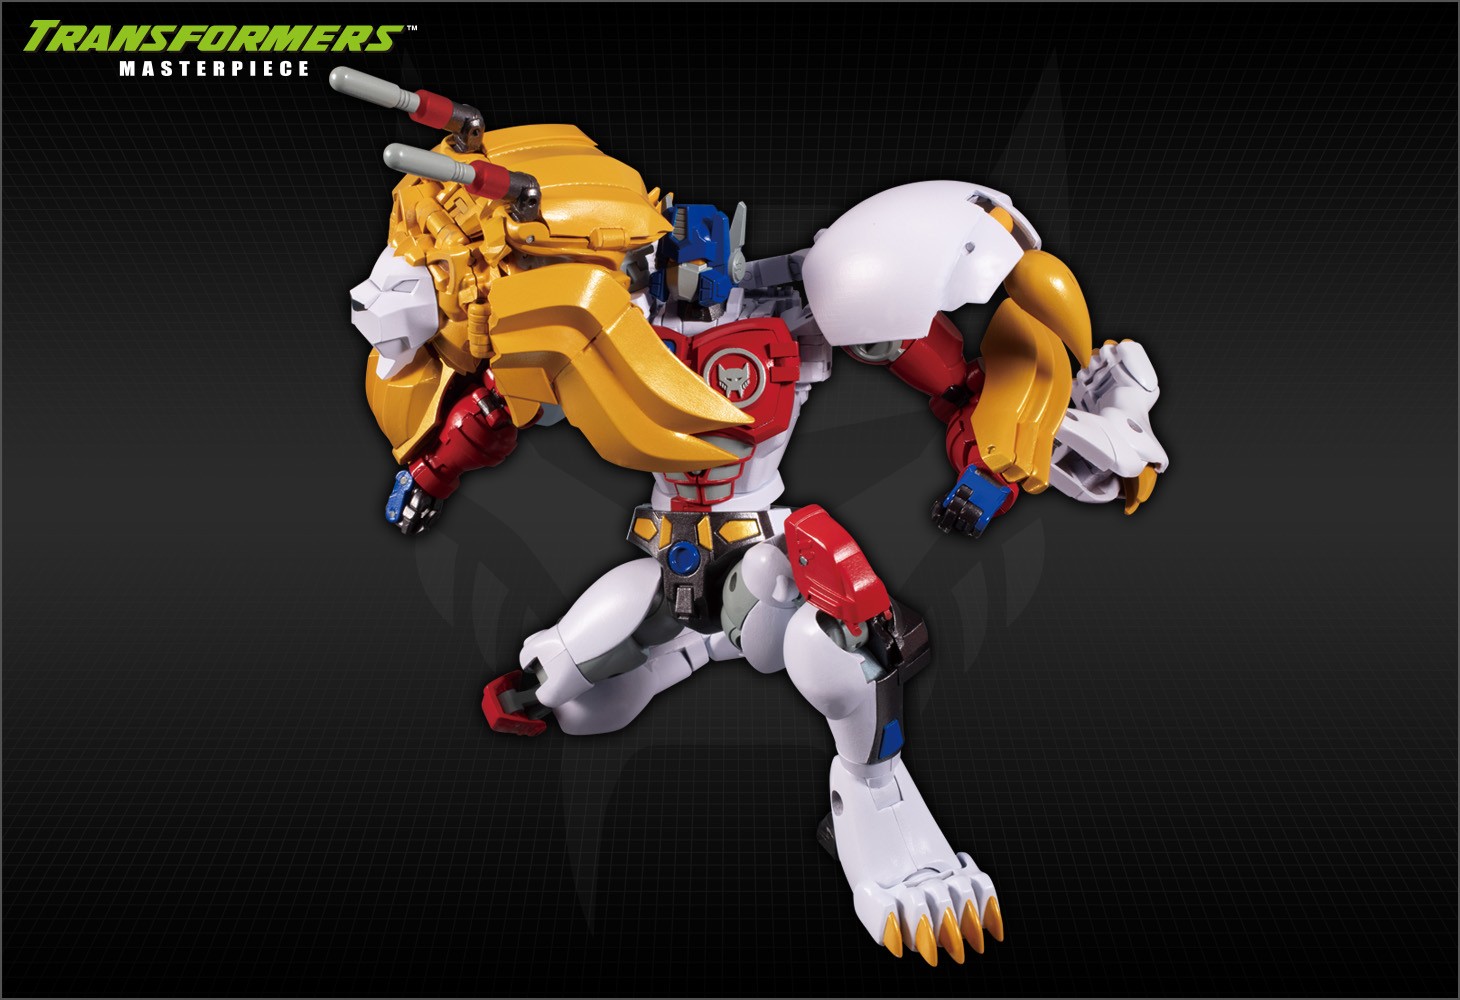 Transformers News: Transformers MP 48 Lio Convoy Official Takara Images and Promotional Video